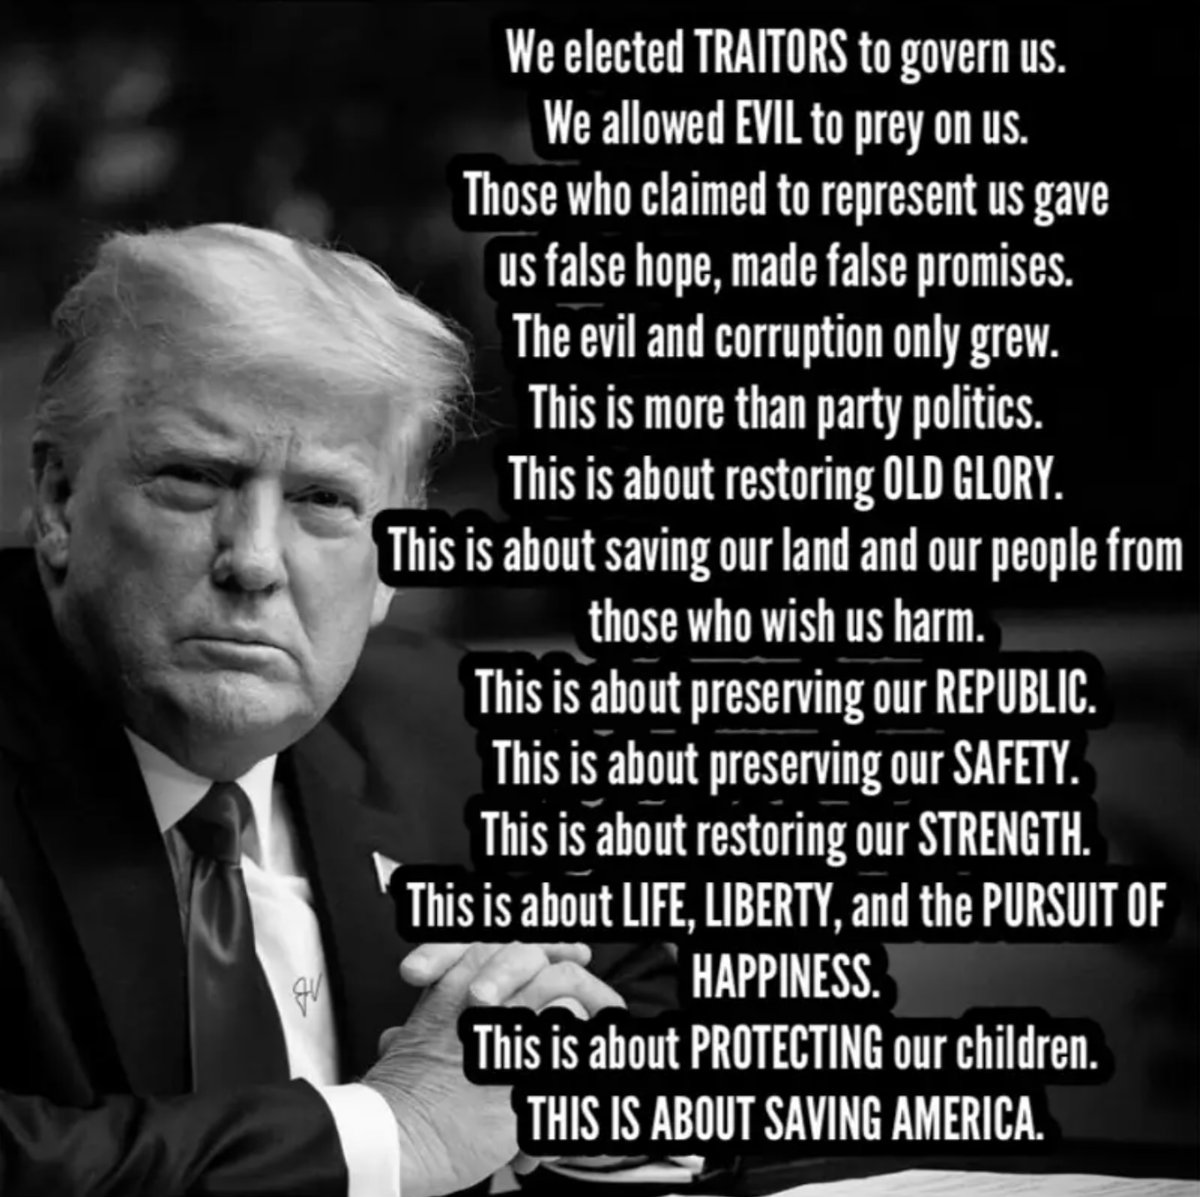 Good morning, Patriot Warriors! President Donald J Trump nails it! The war we freedom fighters find ourselves in is a face to face internal battle of a confrontation of truth with our own federal government. We will win if we remain wise, alert, steadfast, persevere, and never…